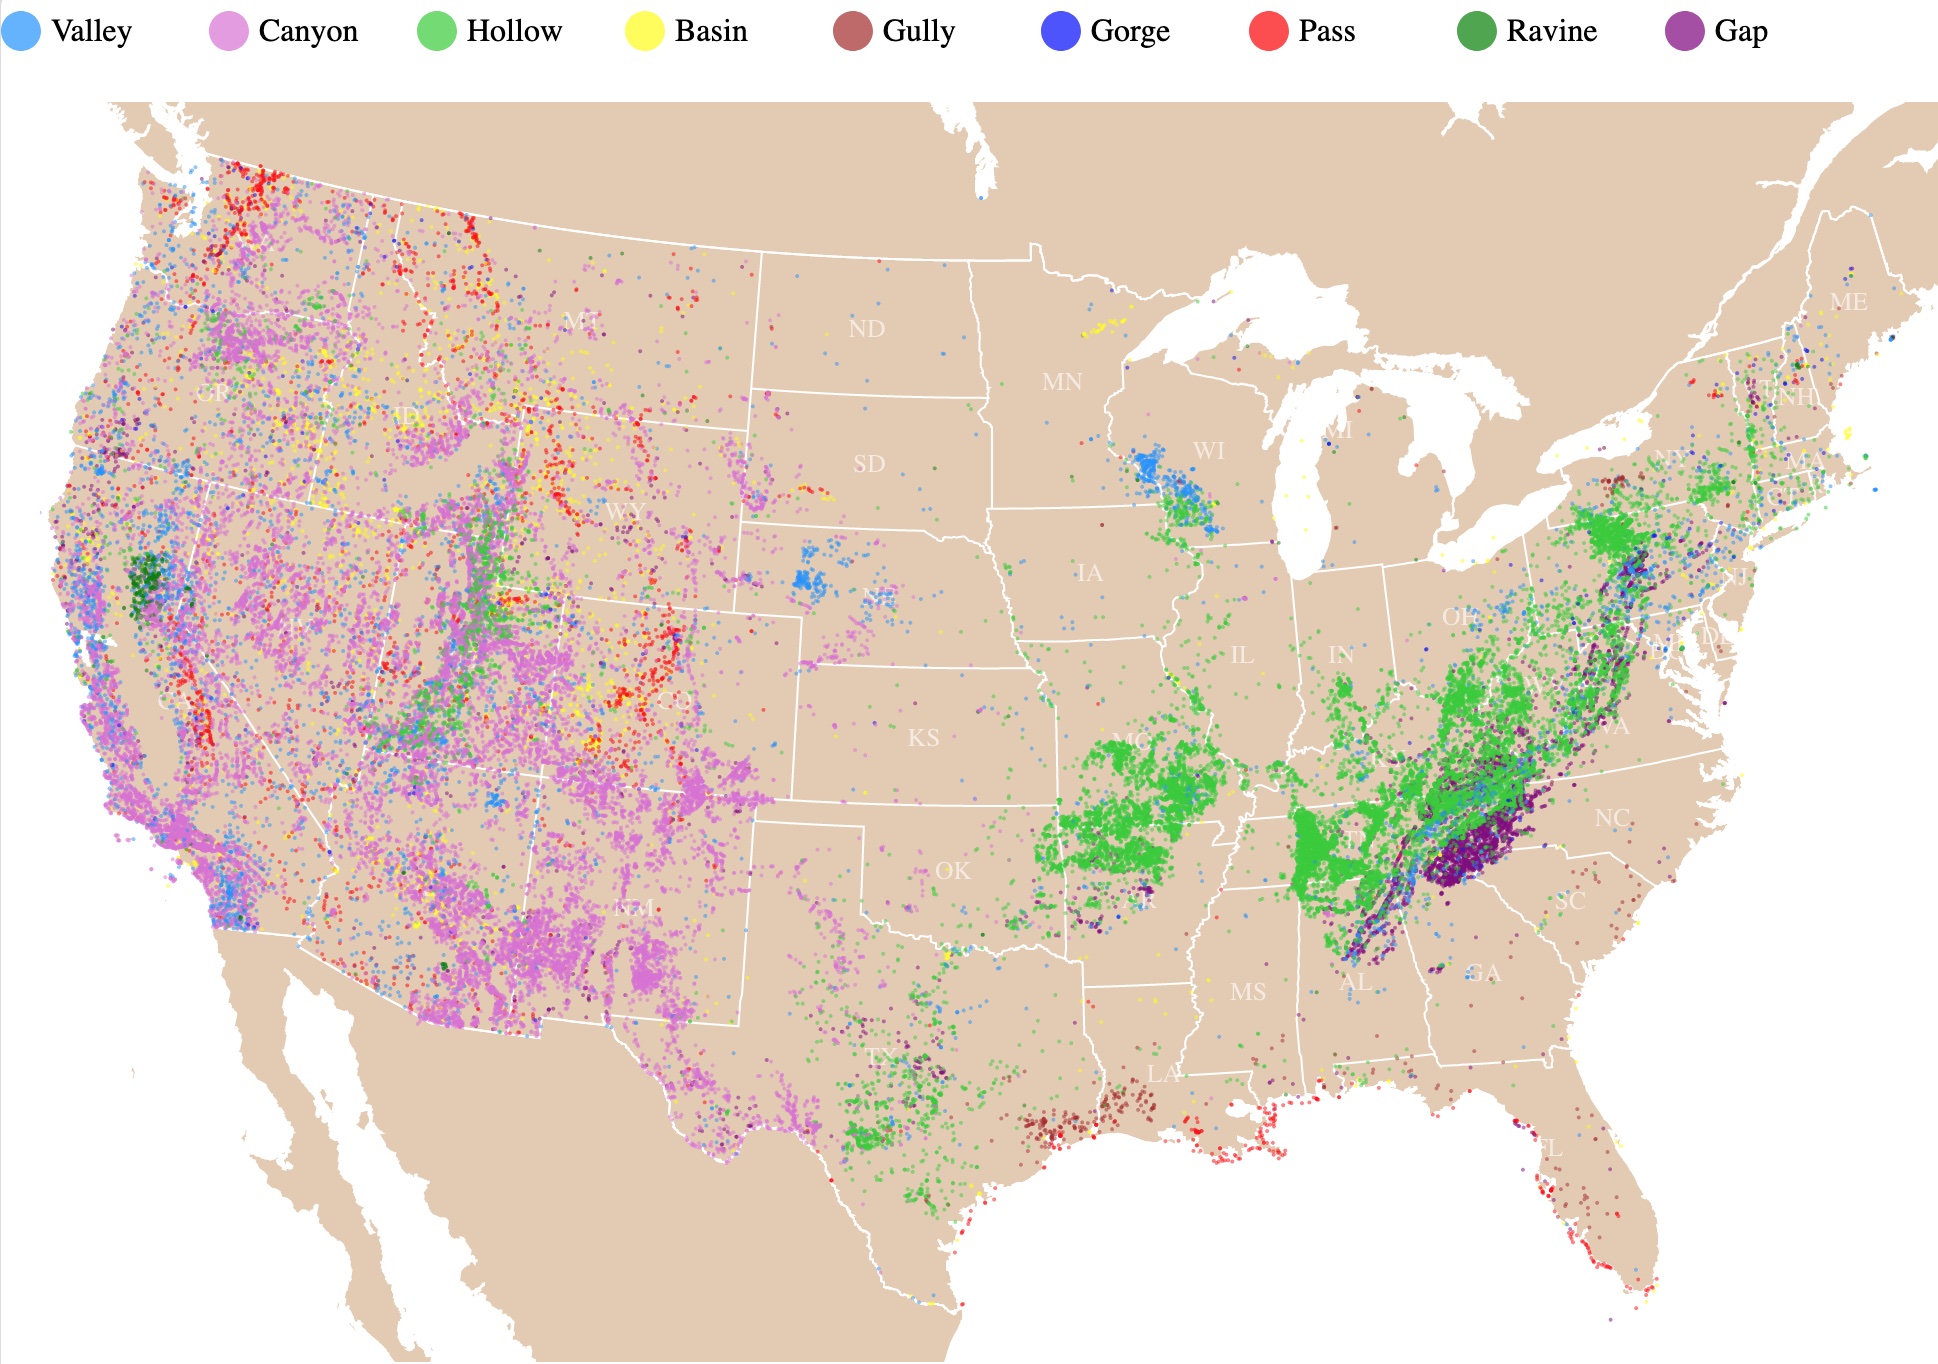 Map of Valleys, canyons, gorges, passes, gaps, hollows, basins, slots and gullies in the US